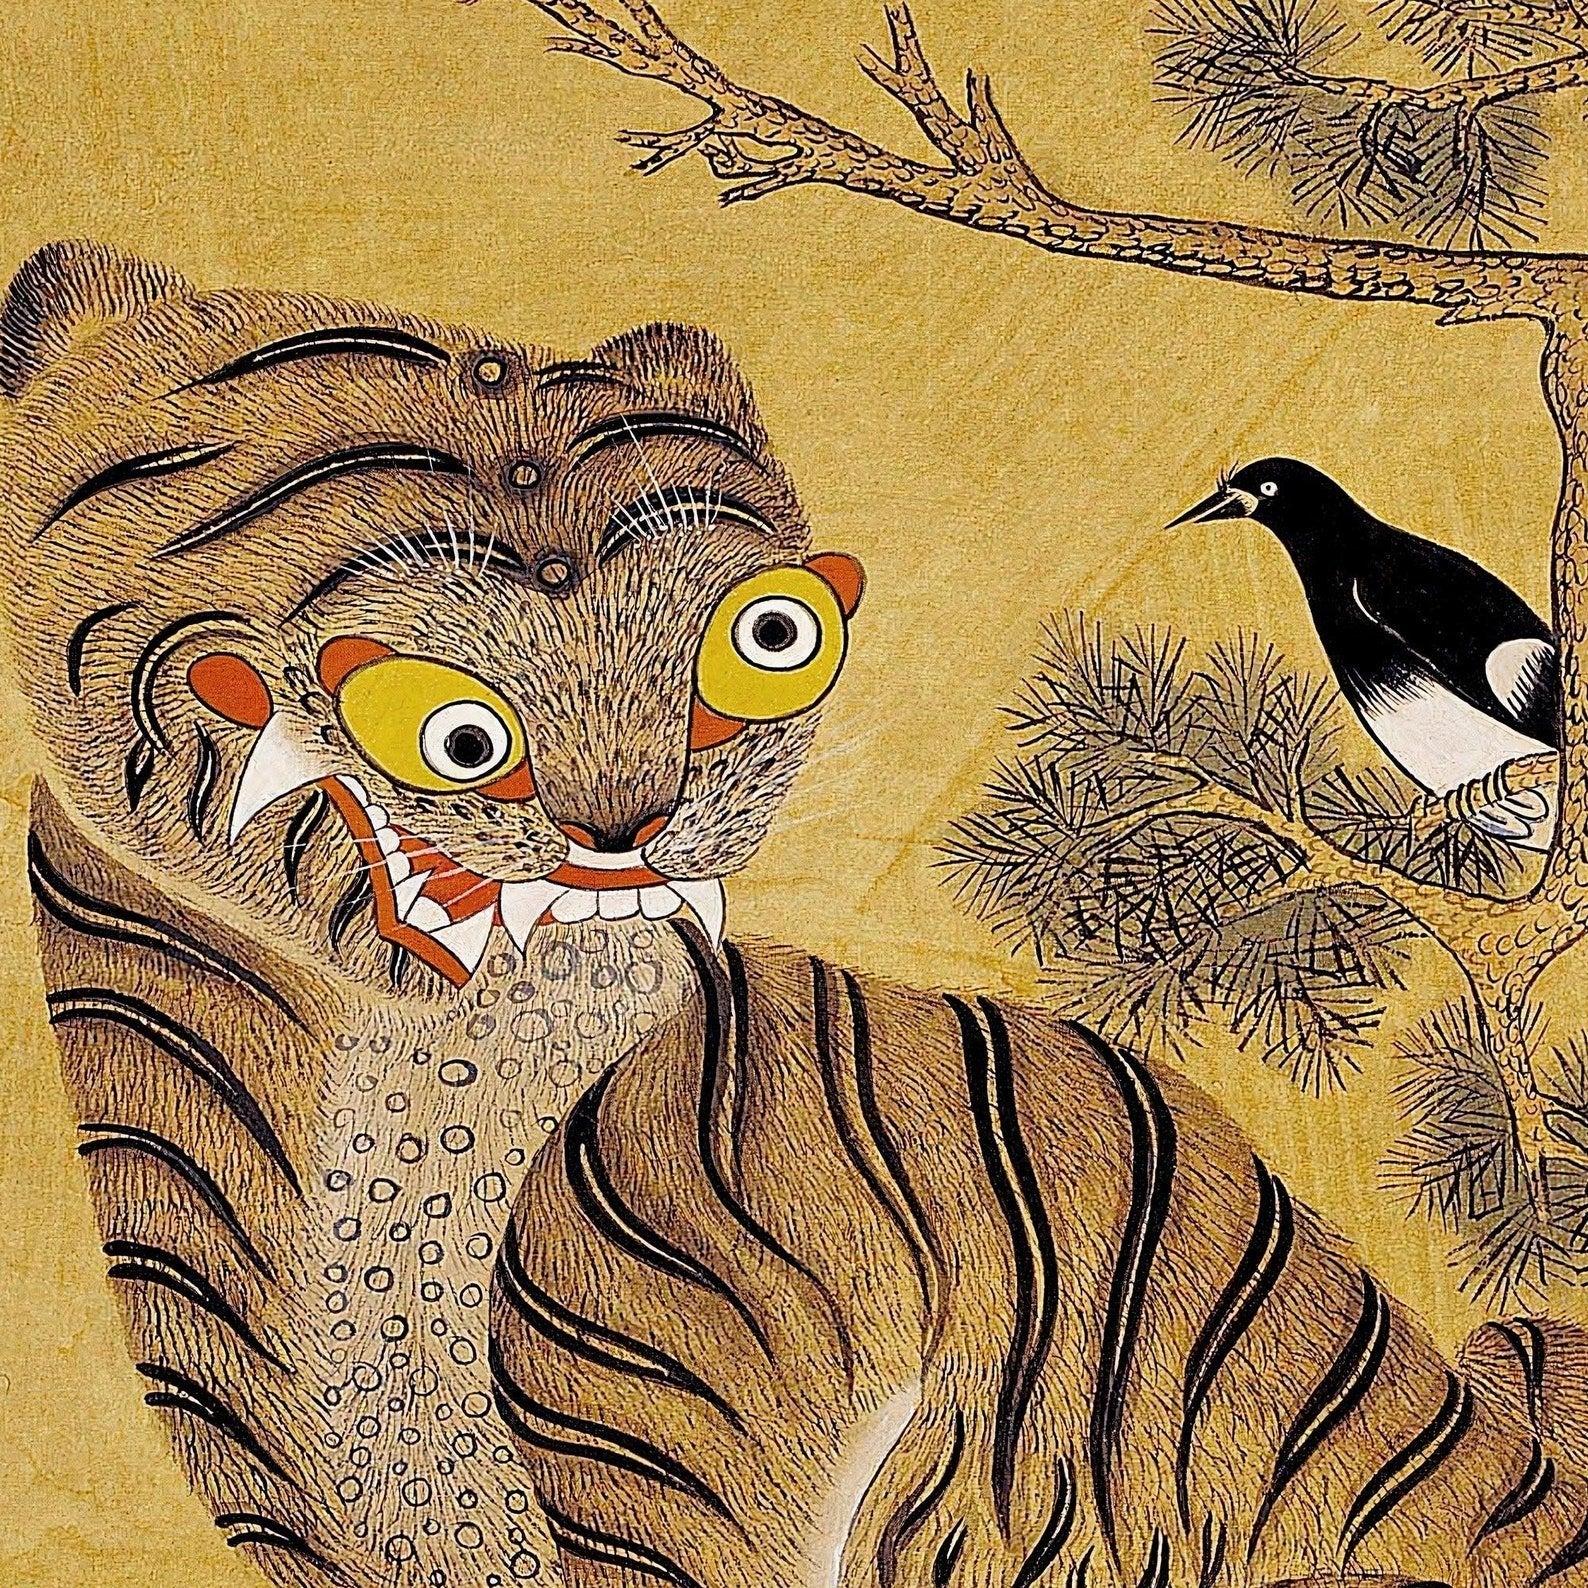 Framed Print Freaky Tiger and Magpie: Korean 19th-Century Minhwa Folk Painting | Vintage Bird Cute Funny Kawaii Gift | Lion Leopard Poster Framed Print